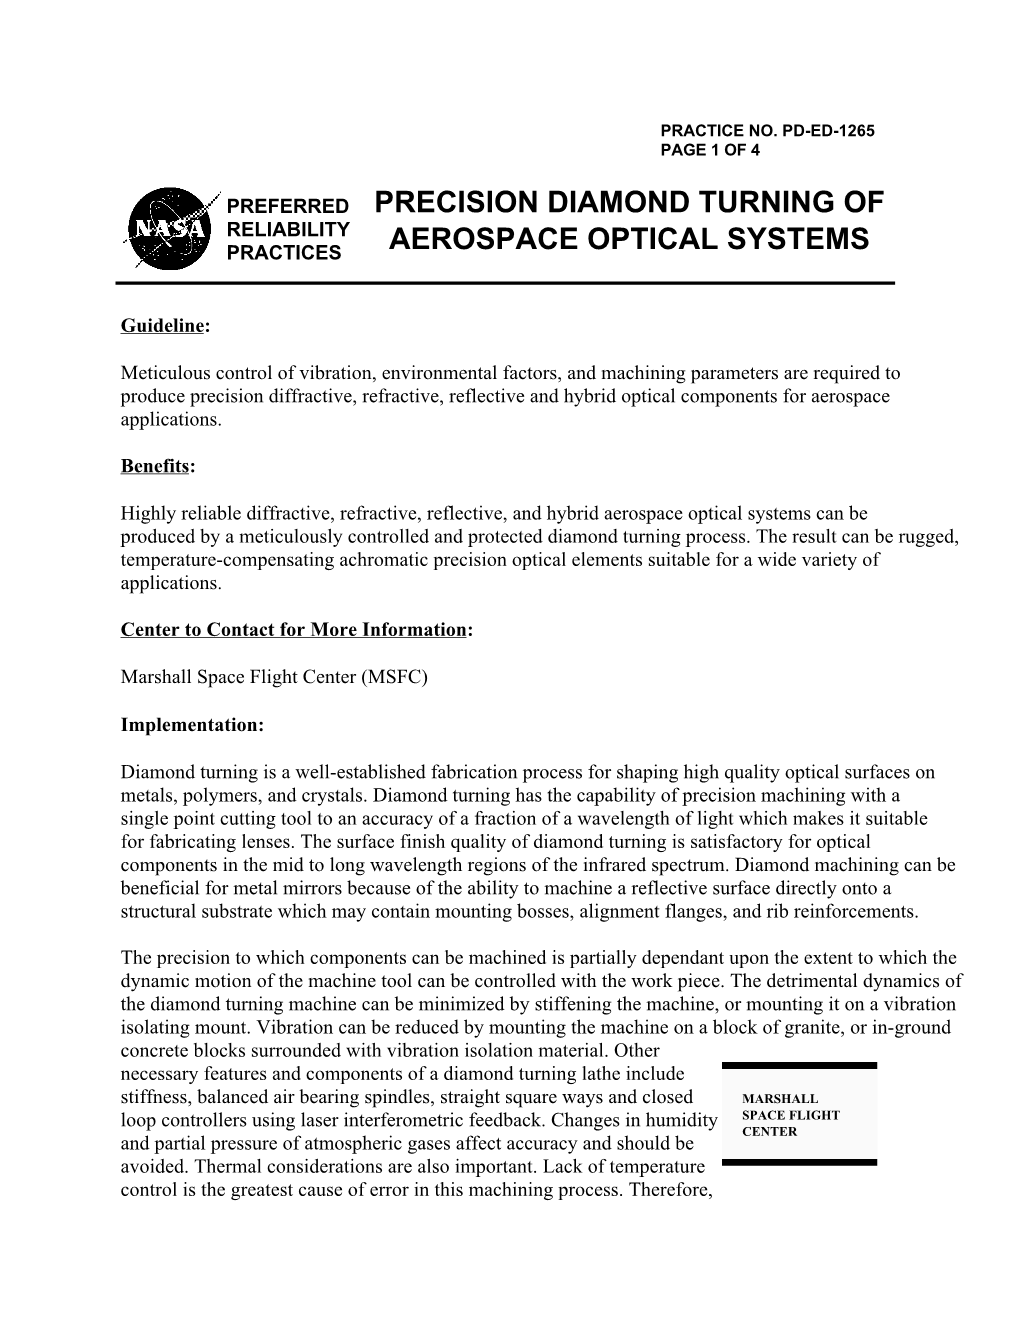 PRECISION DIAMOND TURNING of AEROSPACE OPTICAL SYSTEMS the Environment Housing the Diamond Turning Lathe Should Be Maintained to ± 0.01°F